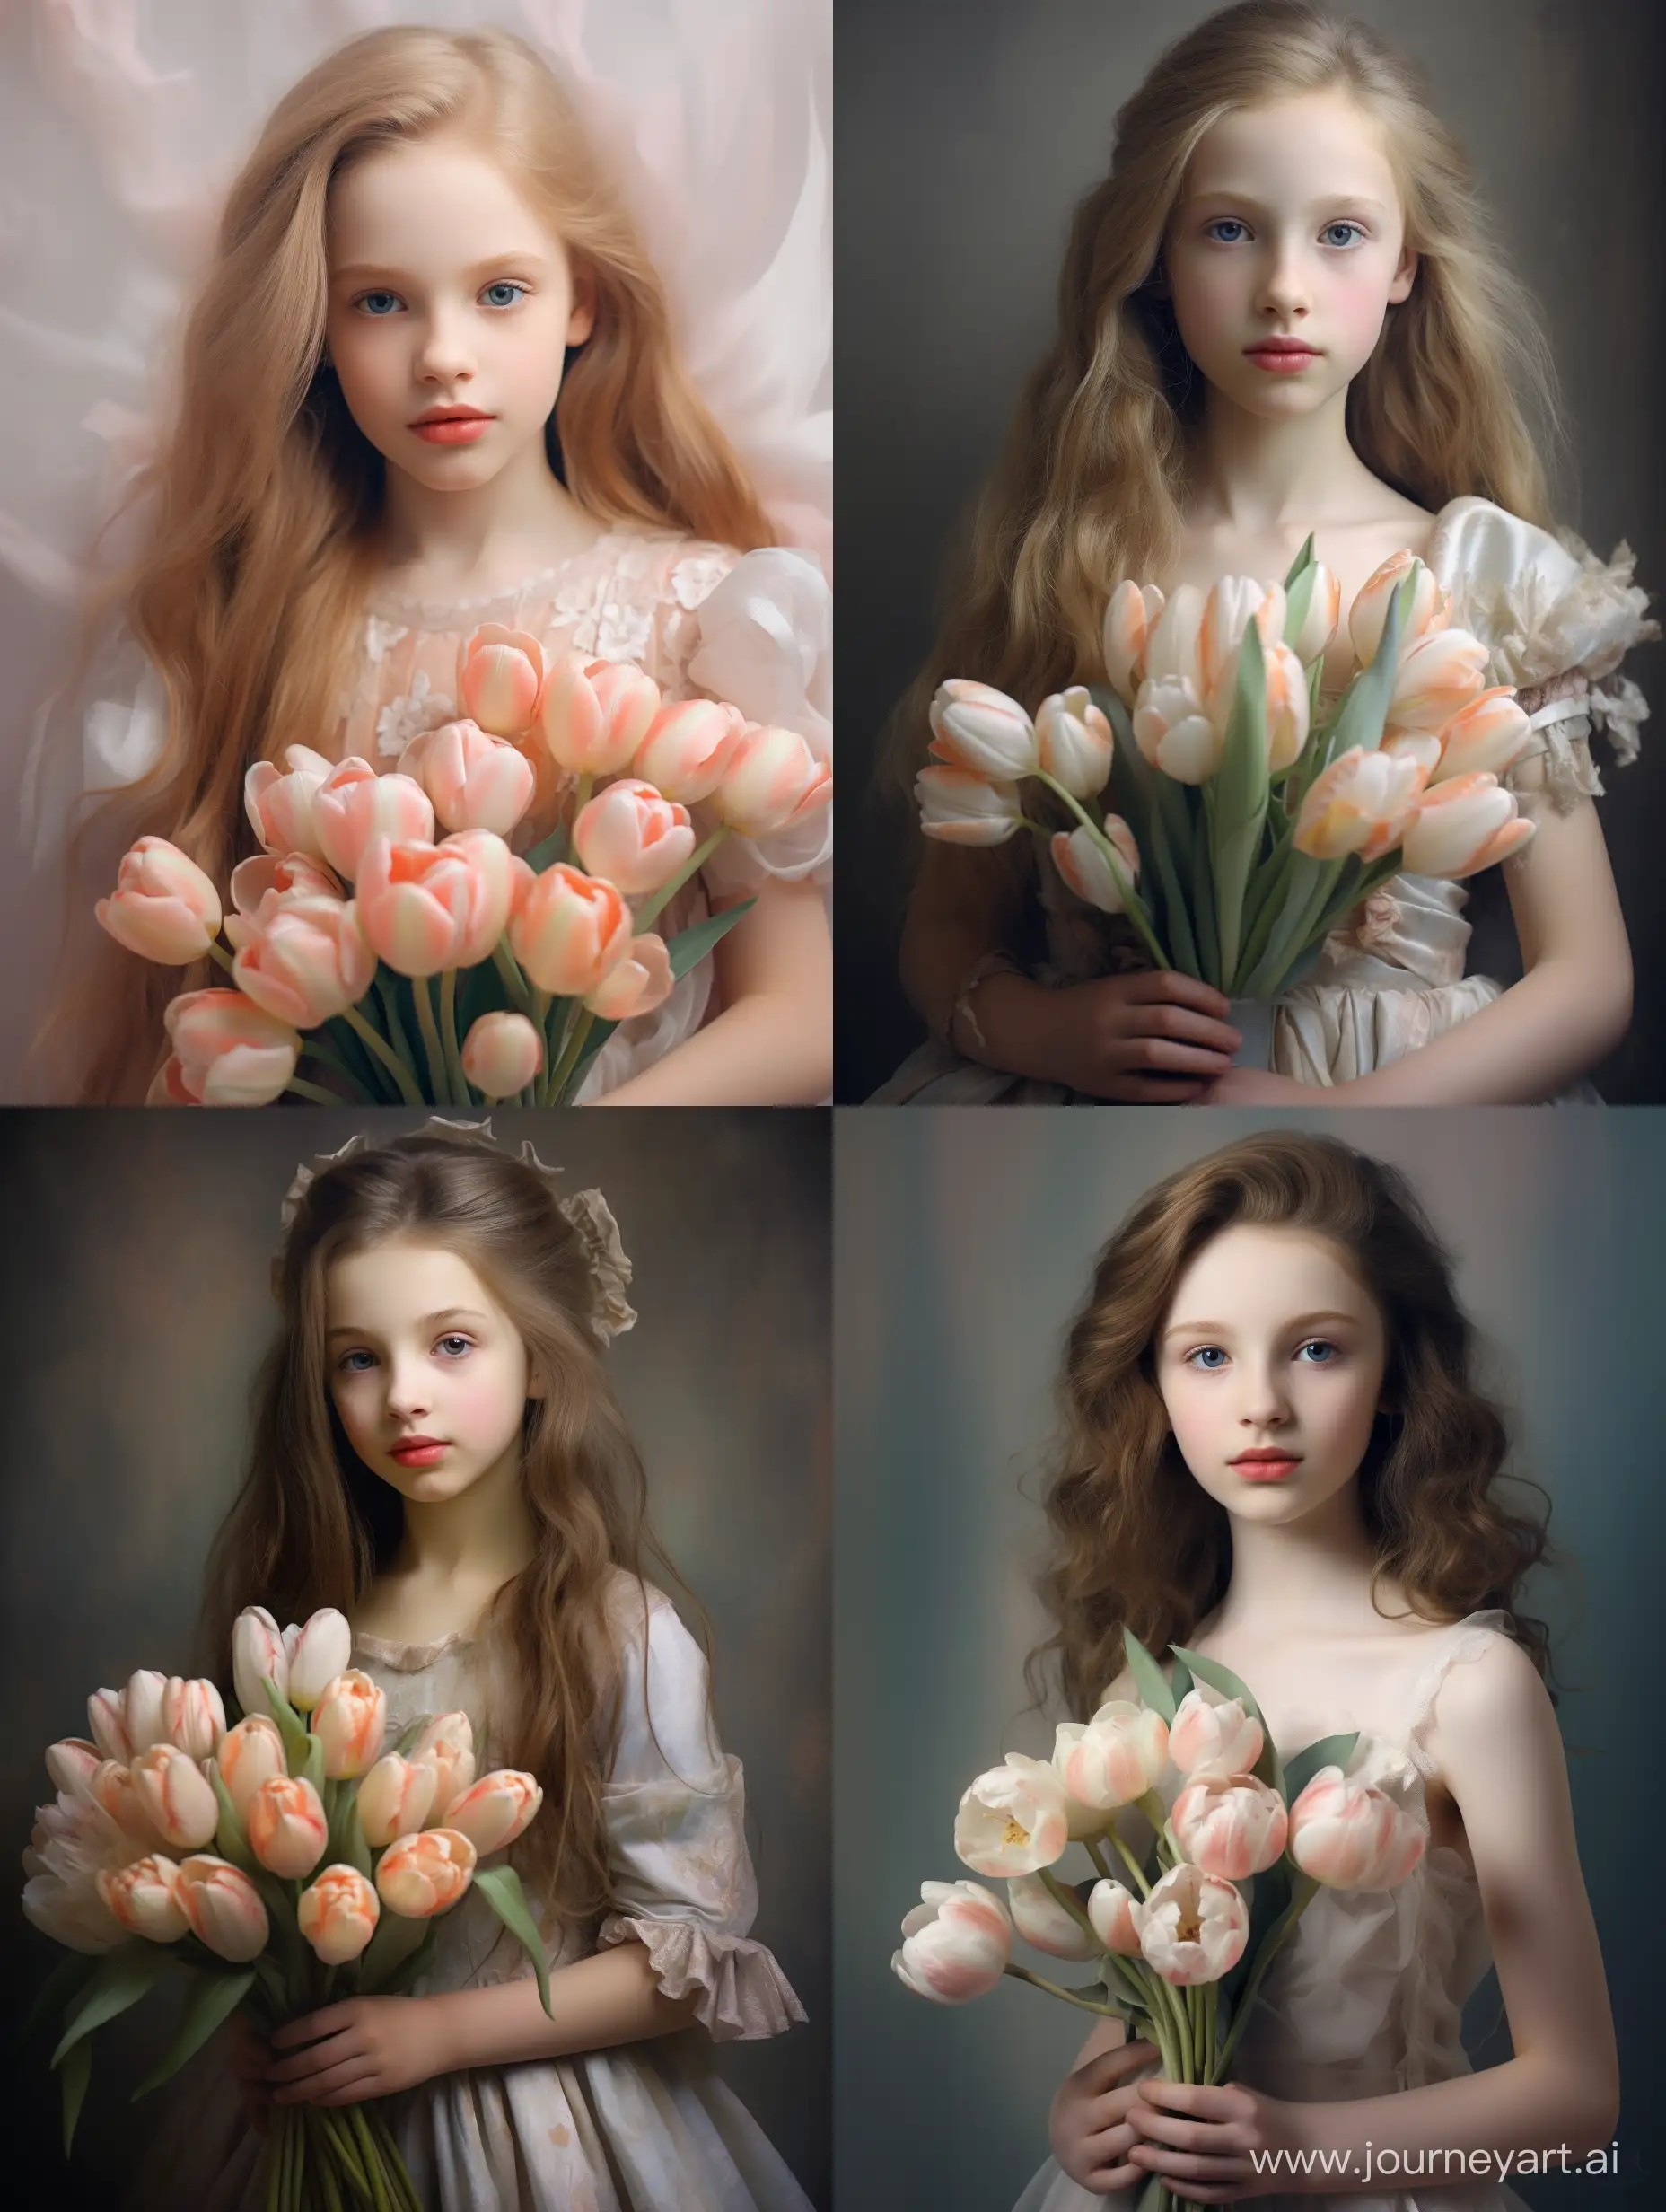 Charming-Young-Girl-Poses-with-Pastel-Tulip-Bouquet-in-Heartwarming-Photo